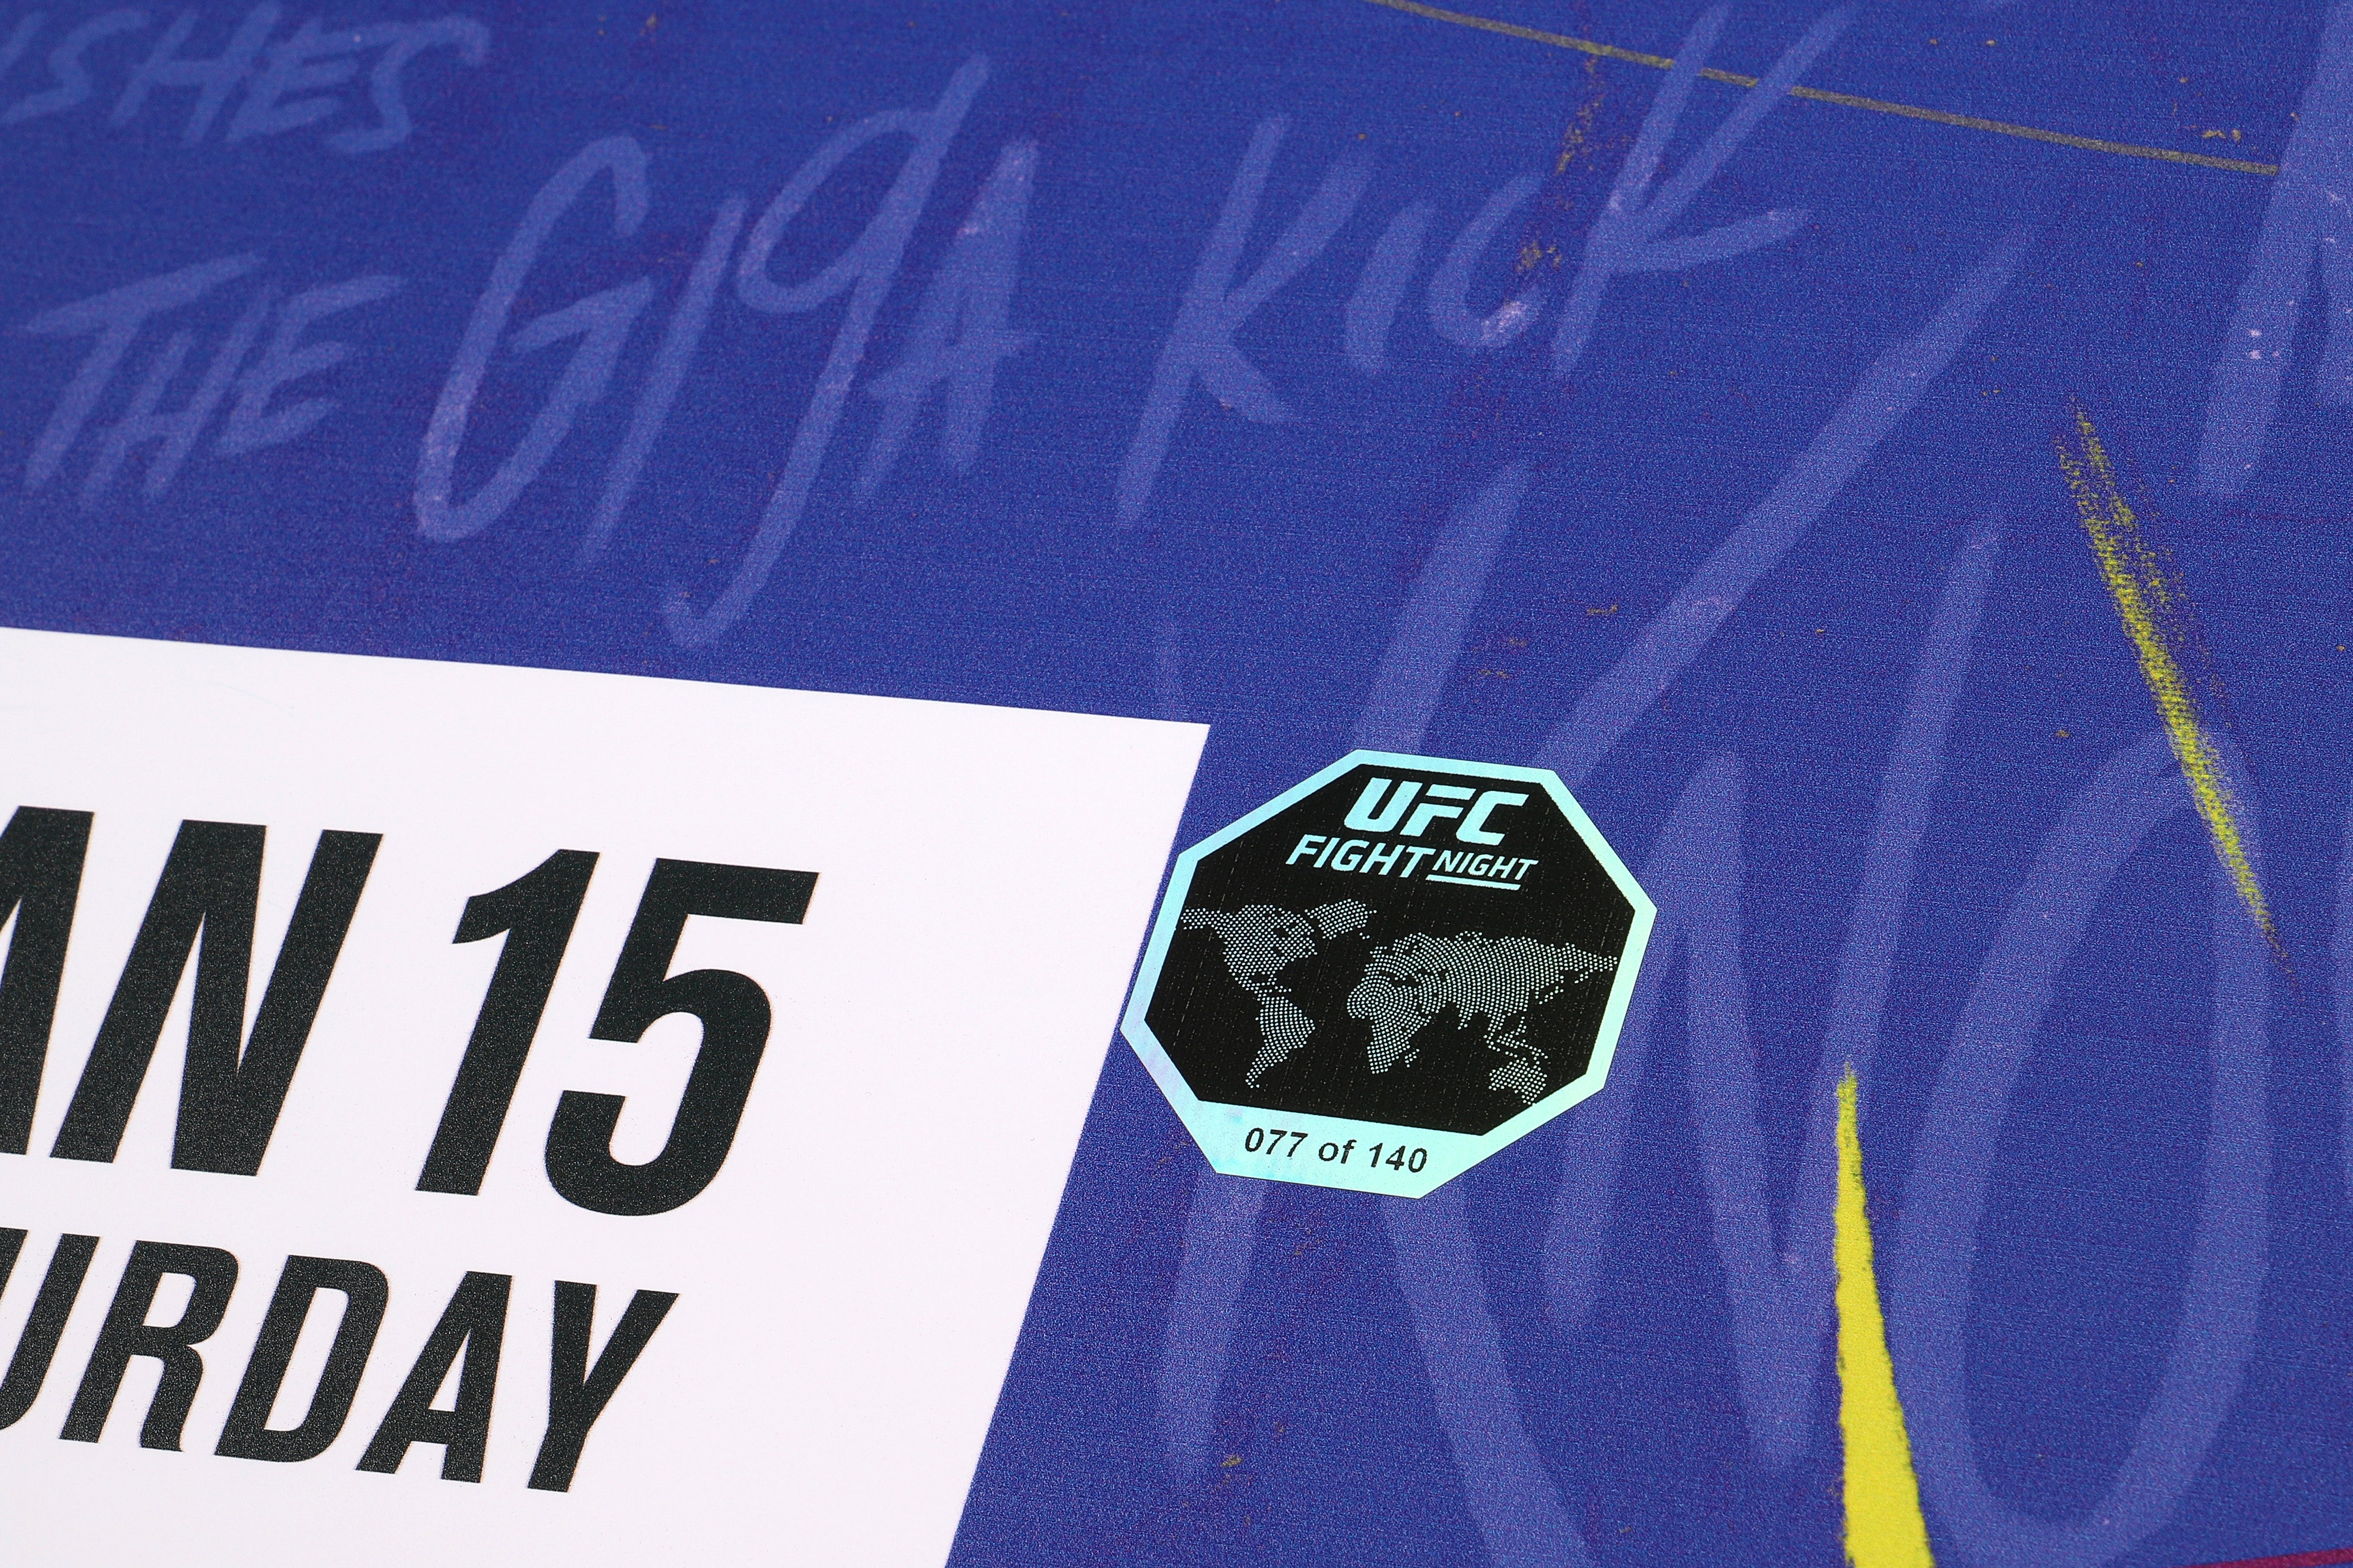 Event poster from UFC Vegas 47